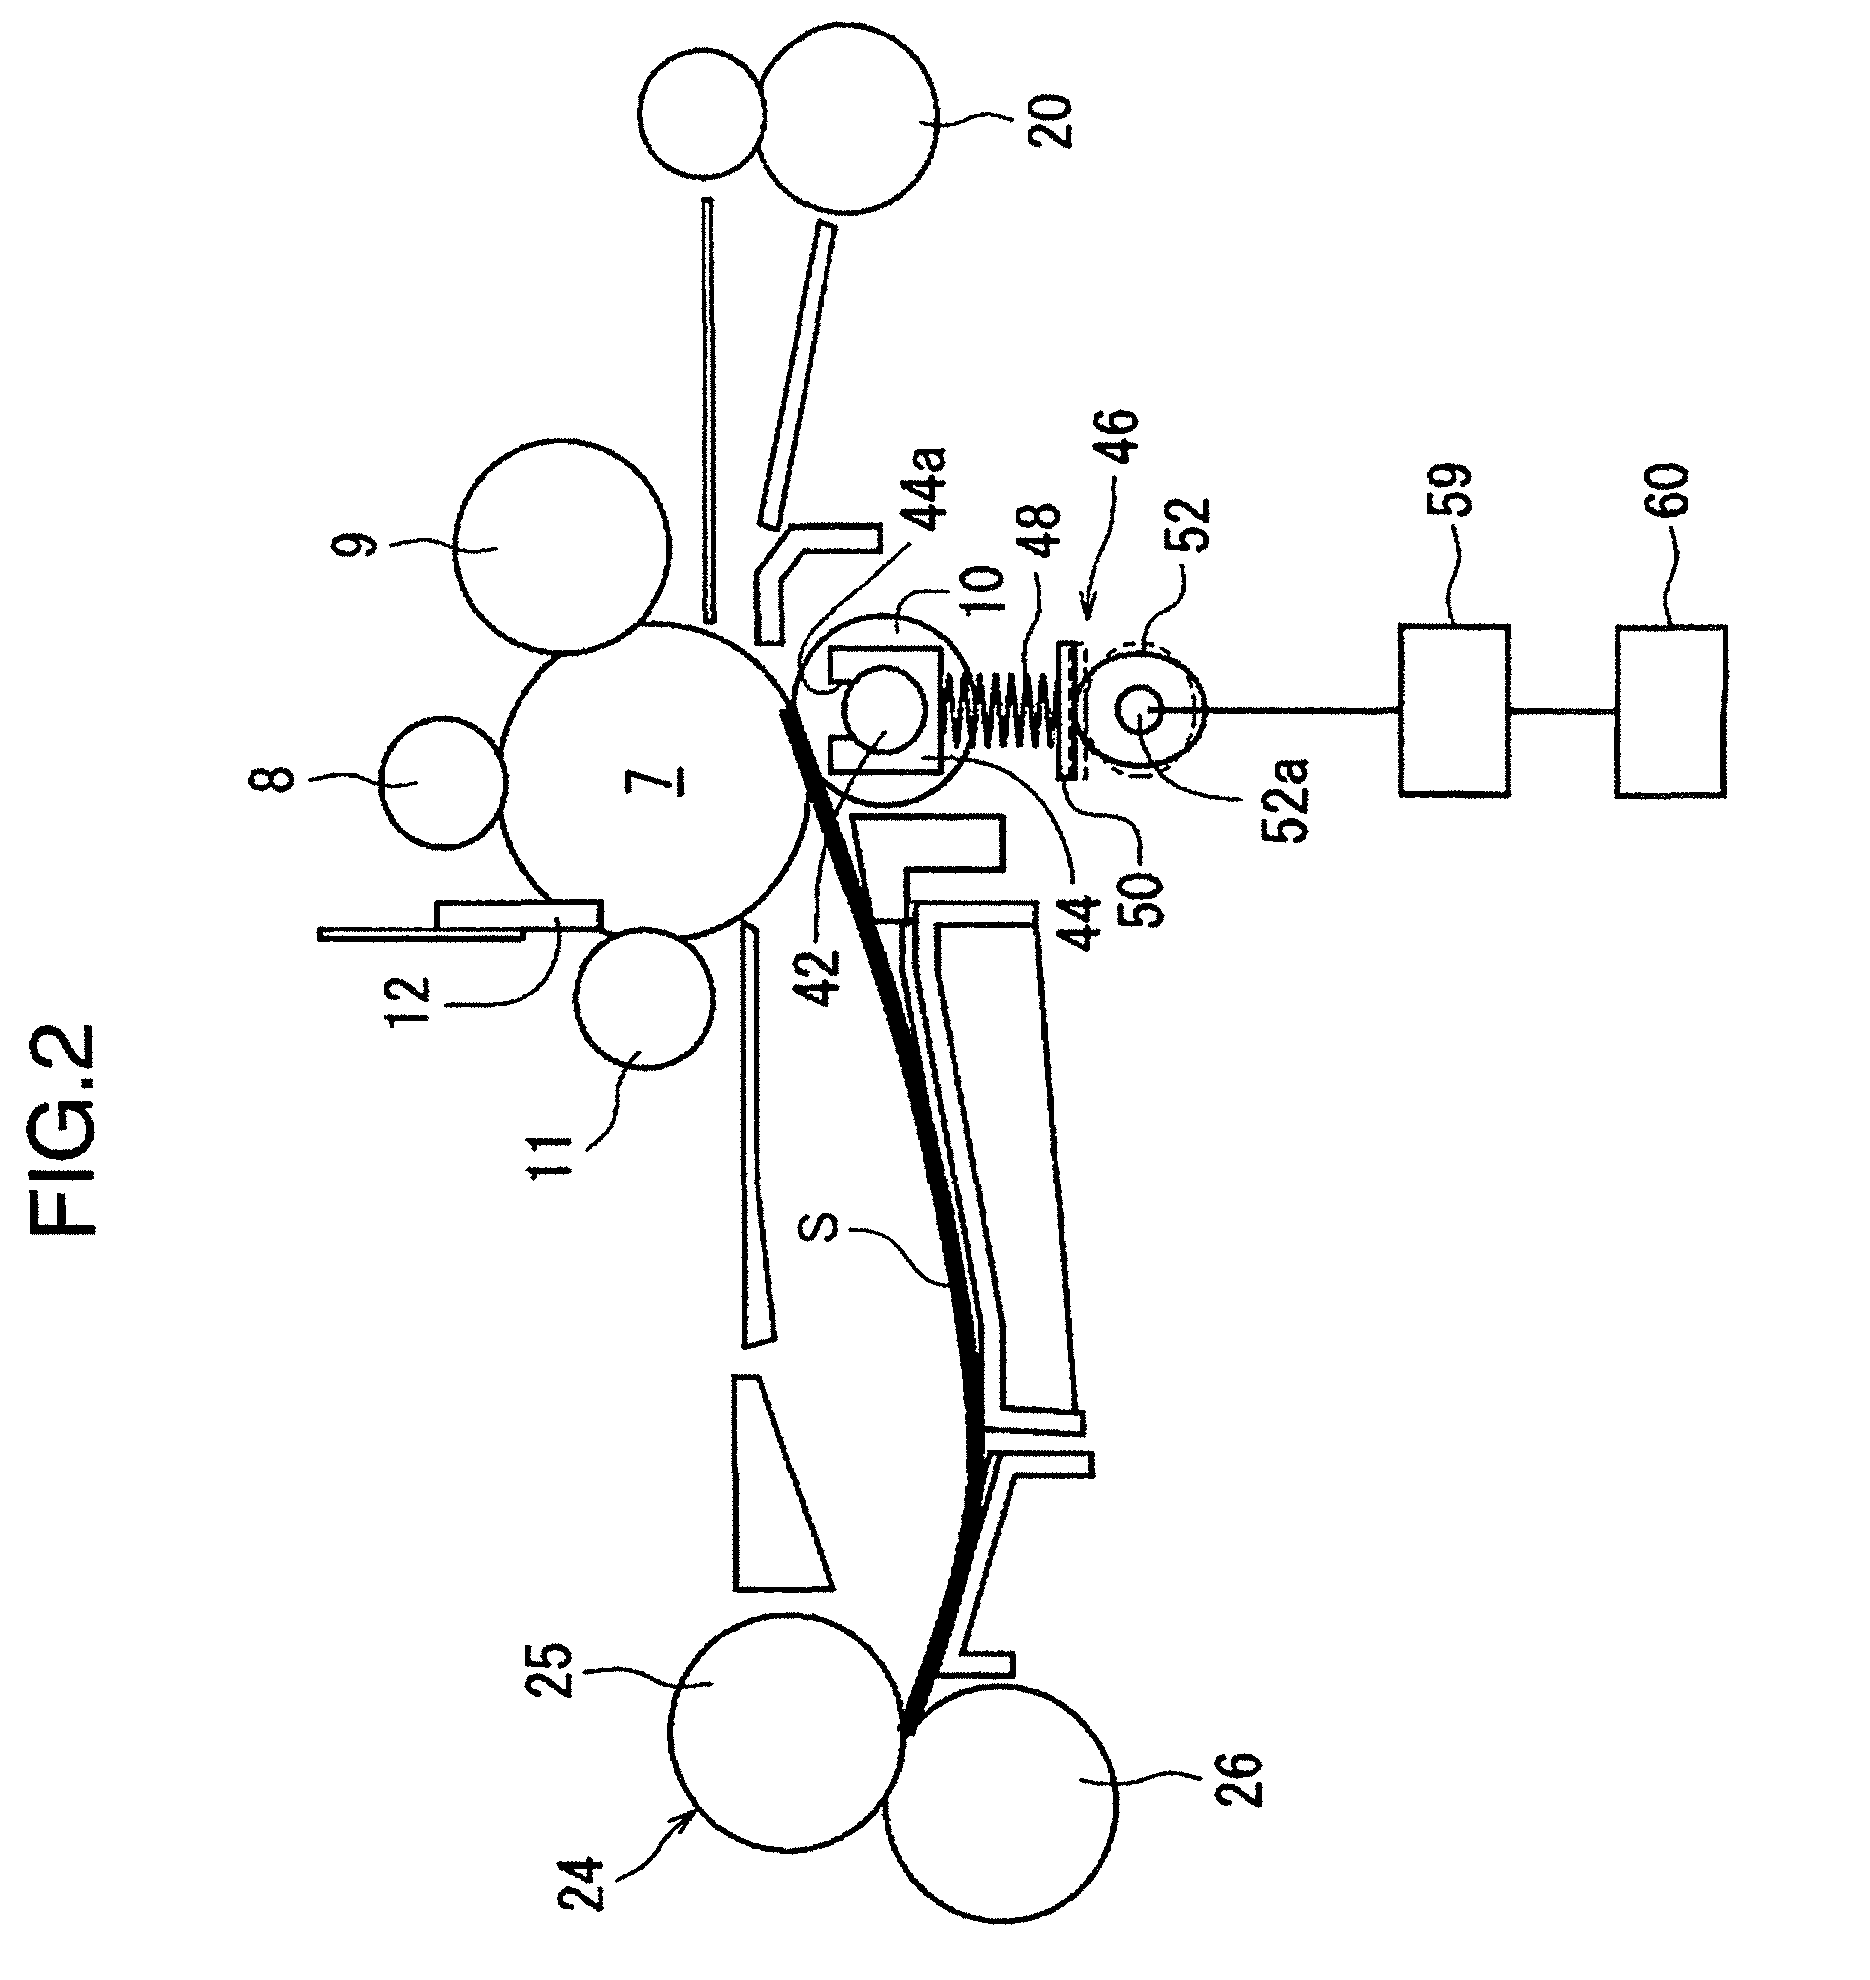 Image forming apparatus provided with transfer roller